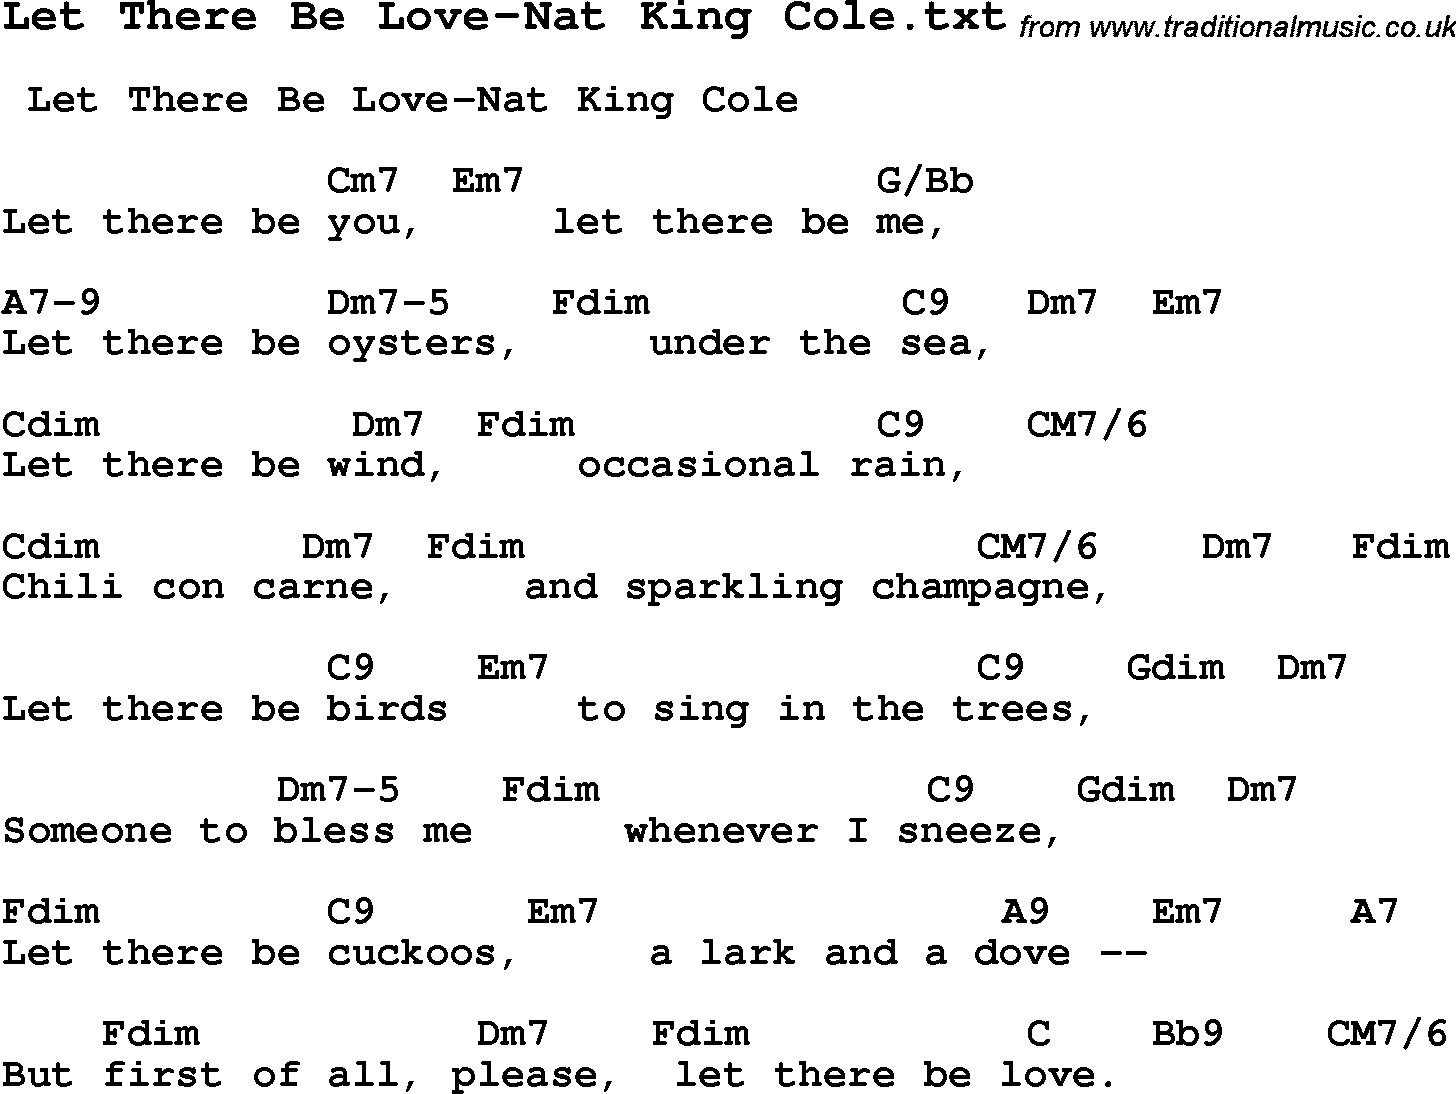 Jazz Song from top bands and vocal artists with chords, tabs and lyrics - Let There Be Love-Nat King Cole